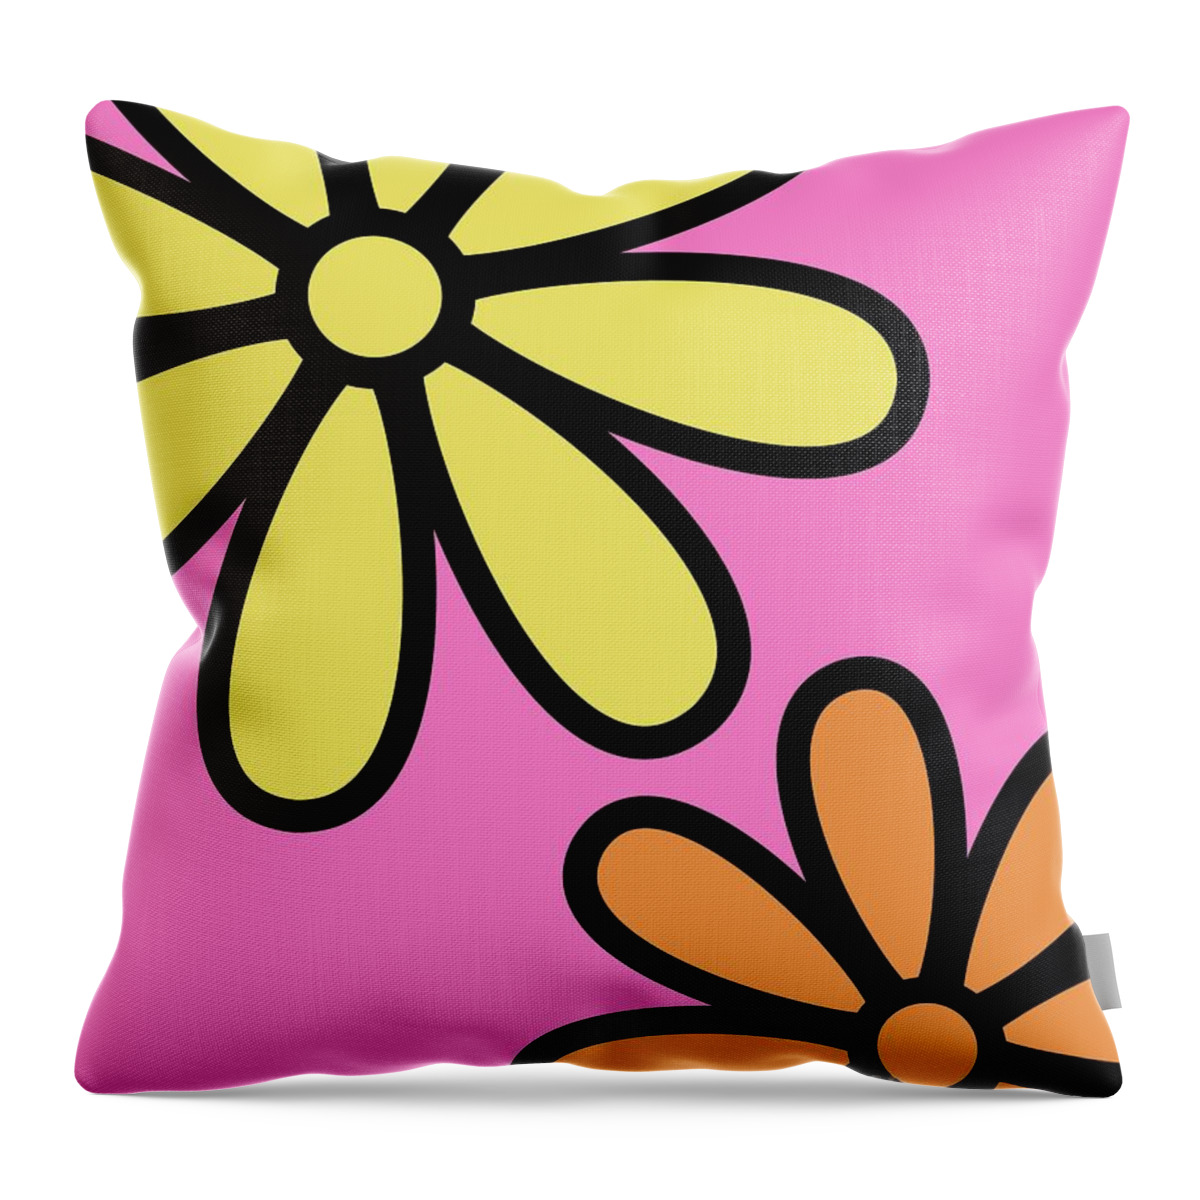 Mod Throw Pillow featuring the digital art Mod Flowers 3 on Pink by Donna Mibus